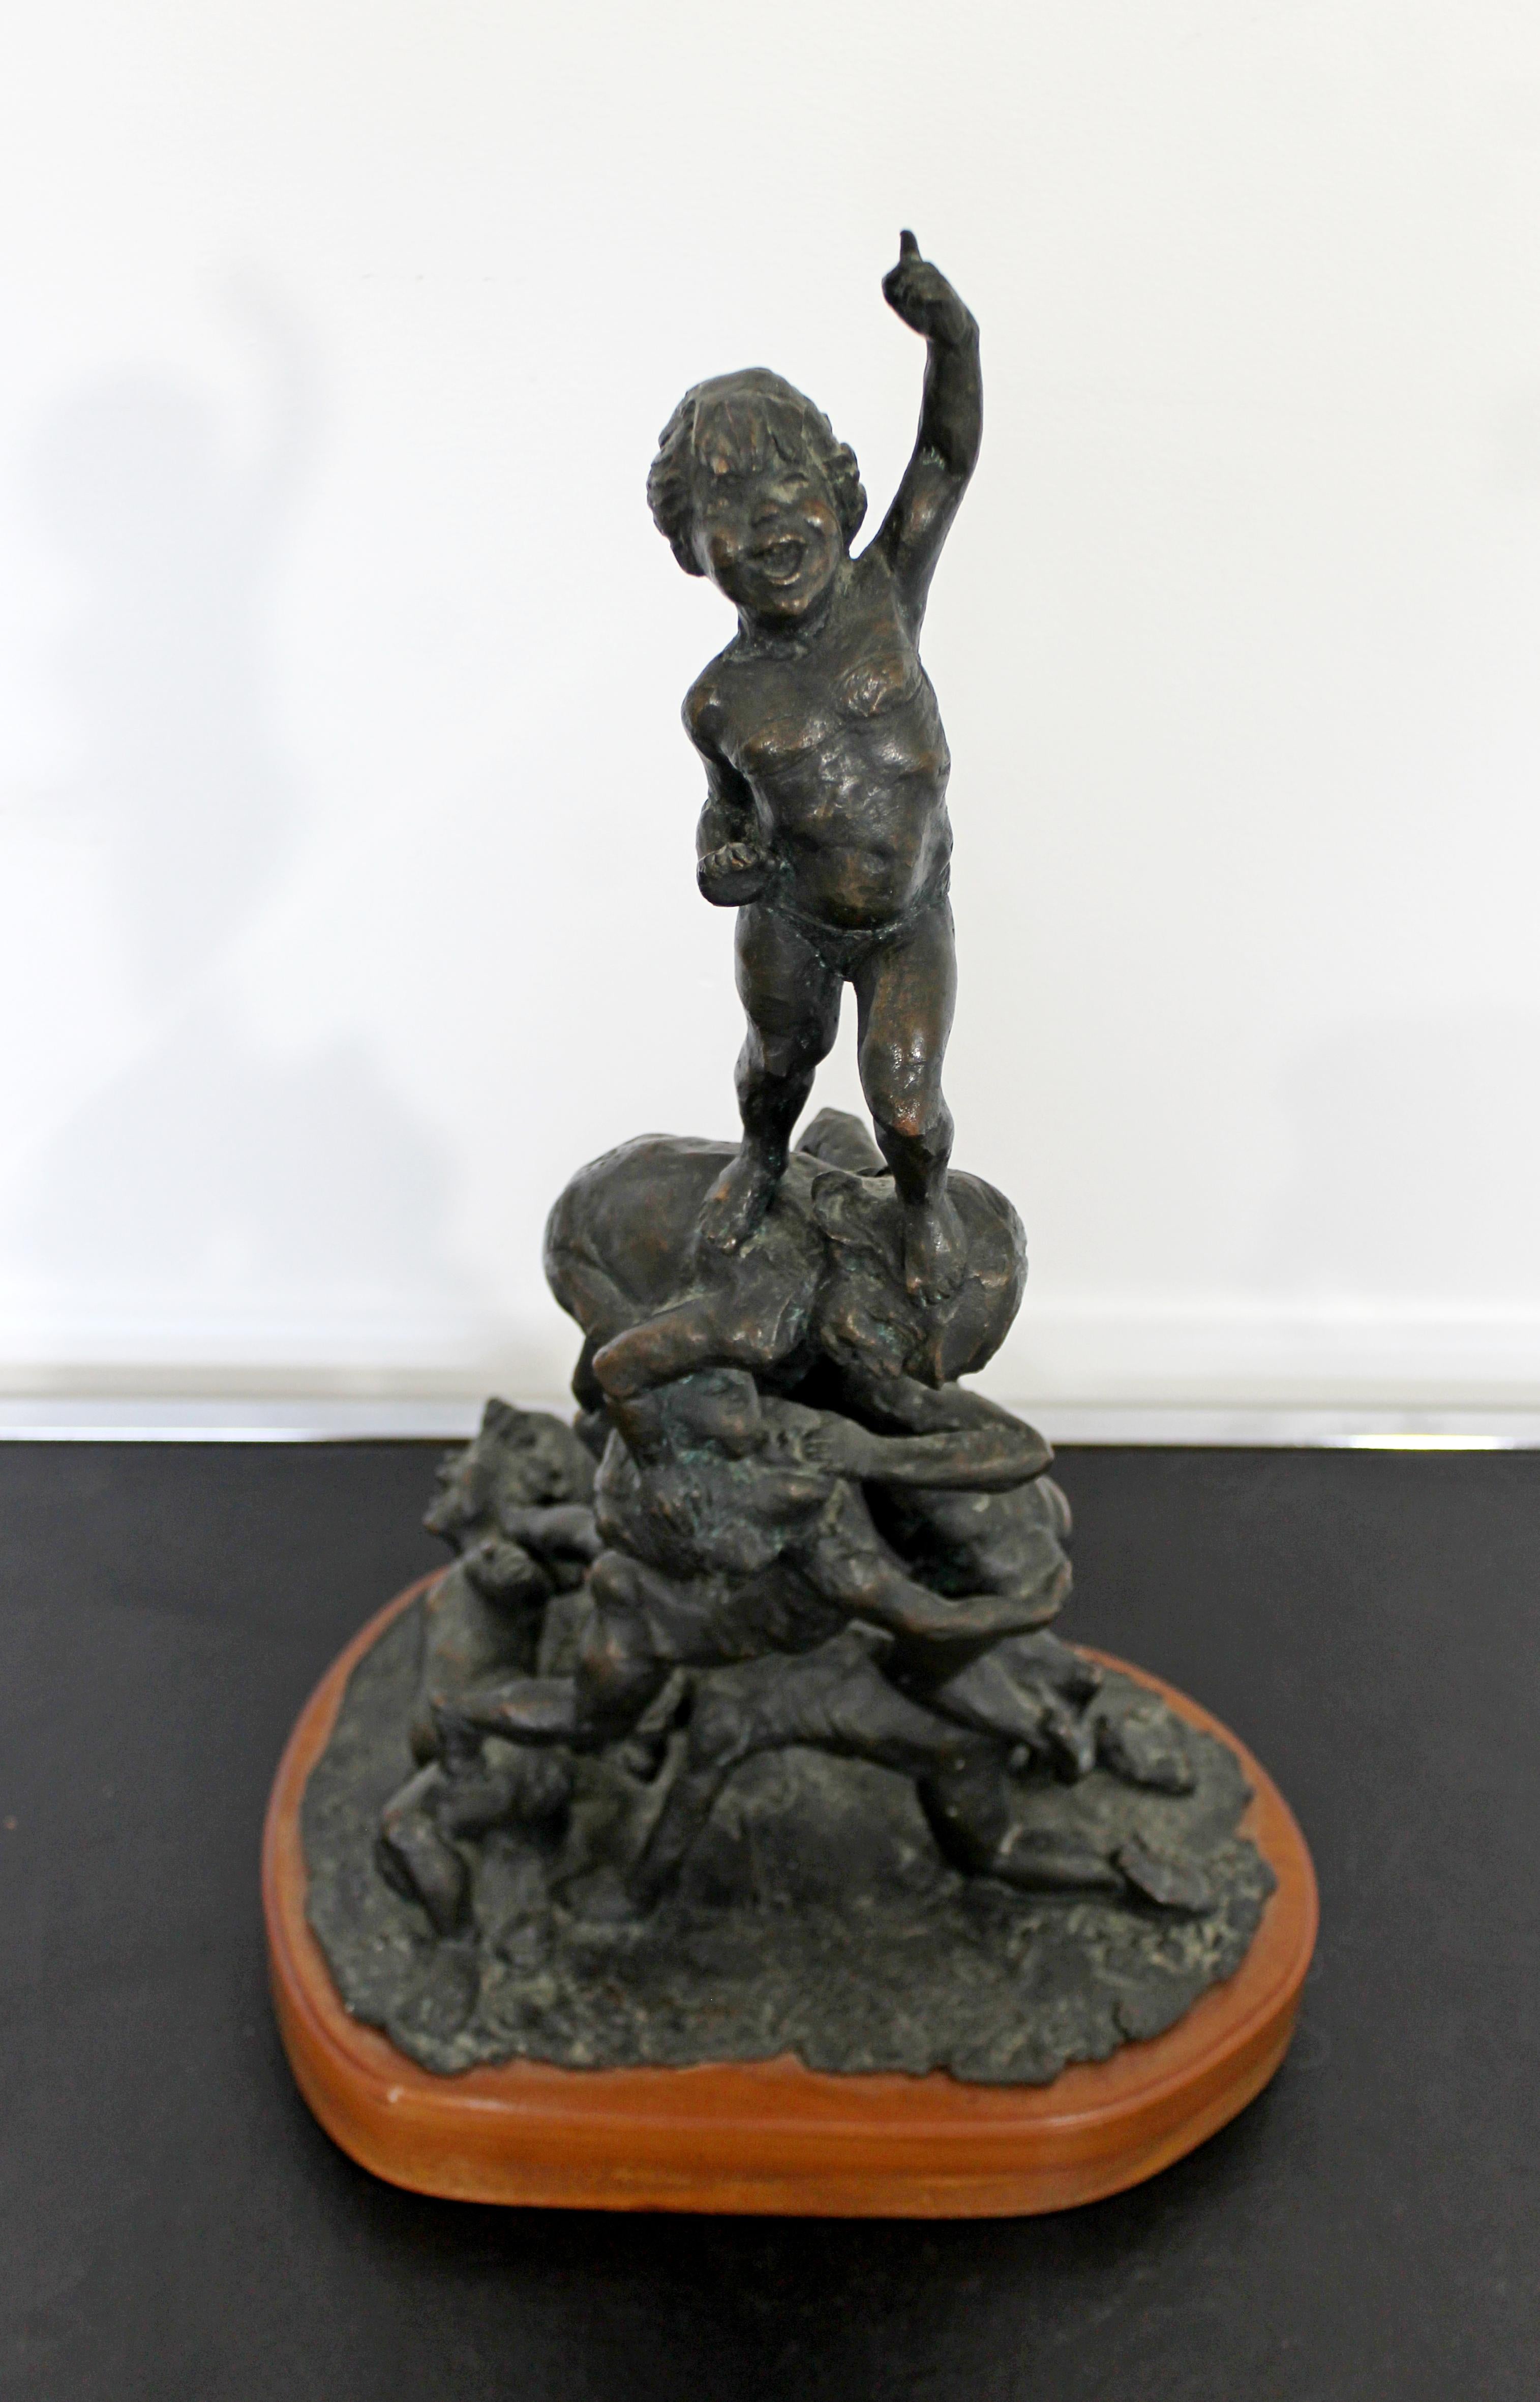 For your consideration is a marvelous, bronze table sculpture, on a wood base, signed Edward Chesney, and dated 1972. In excellent condition. The dimensions are 11